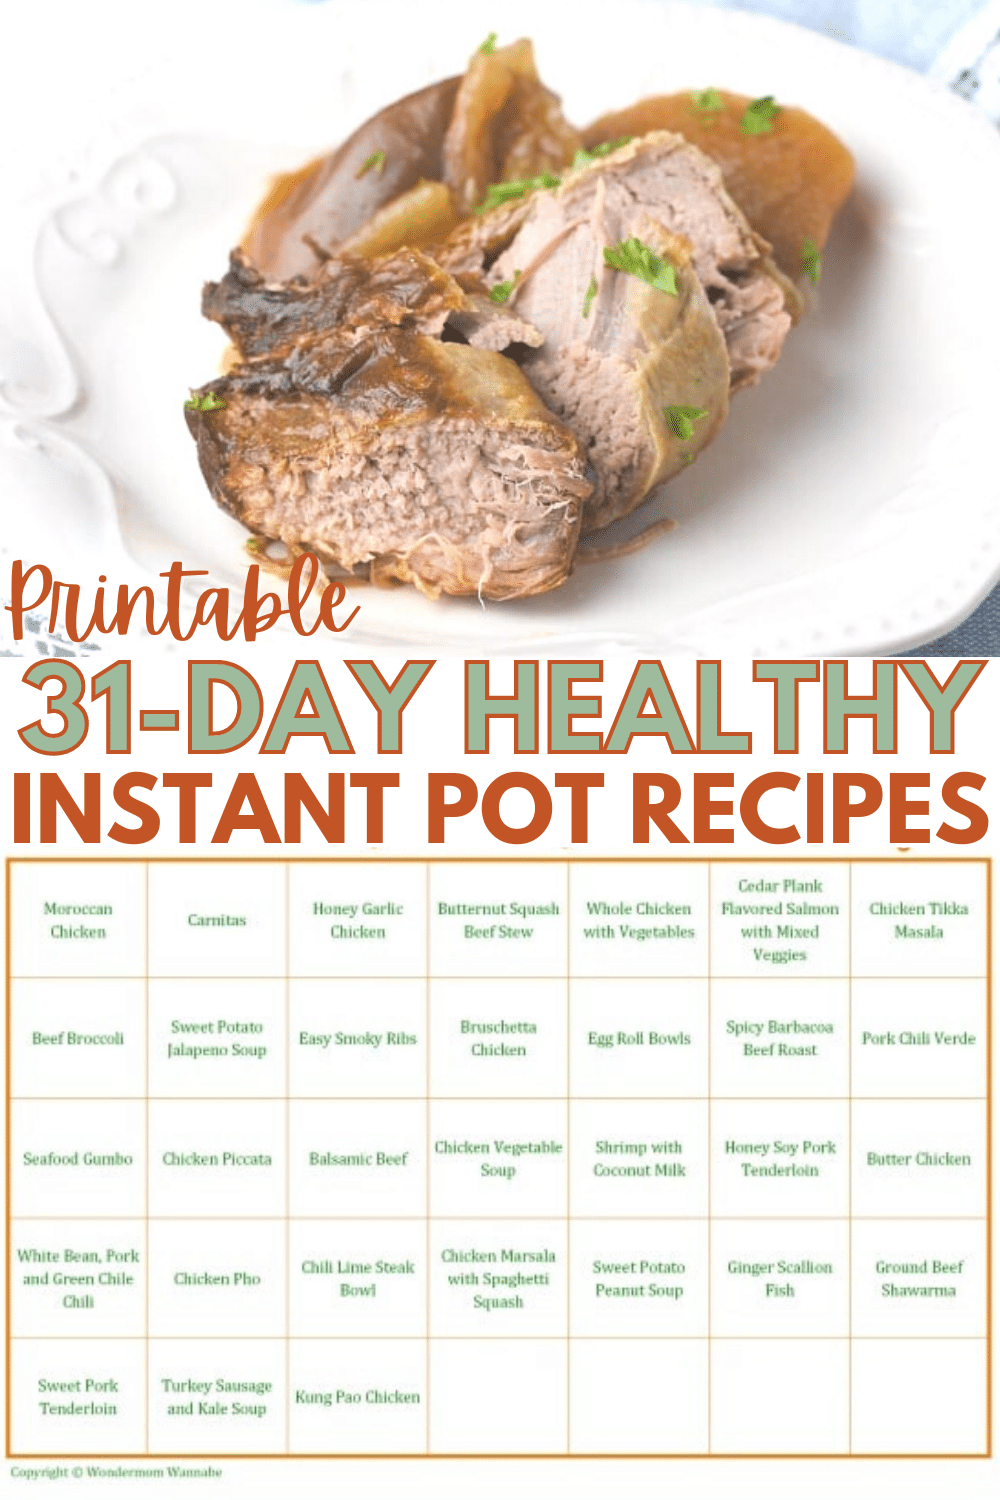 Food can be both convenient AND healthy. Here's an entire month of Healthy Instant Pot Recipes to prove it! Eating healthy has just gotten a lot easier. #instantpot #pressurecooker #healthyeating via @wondermomwannab